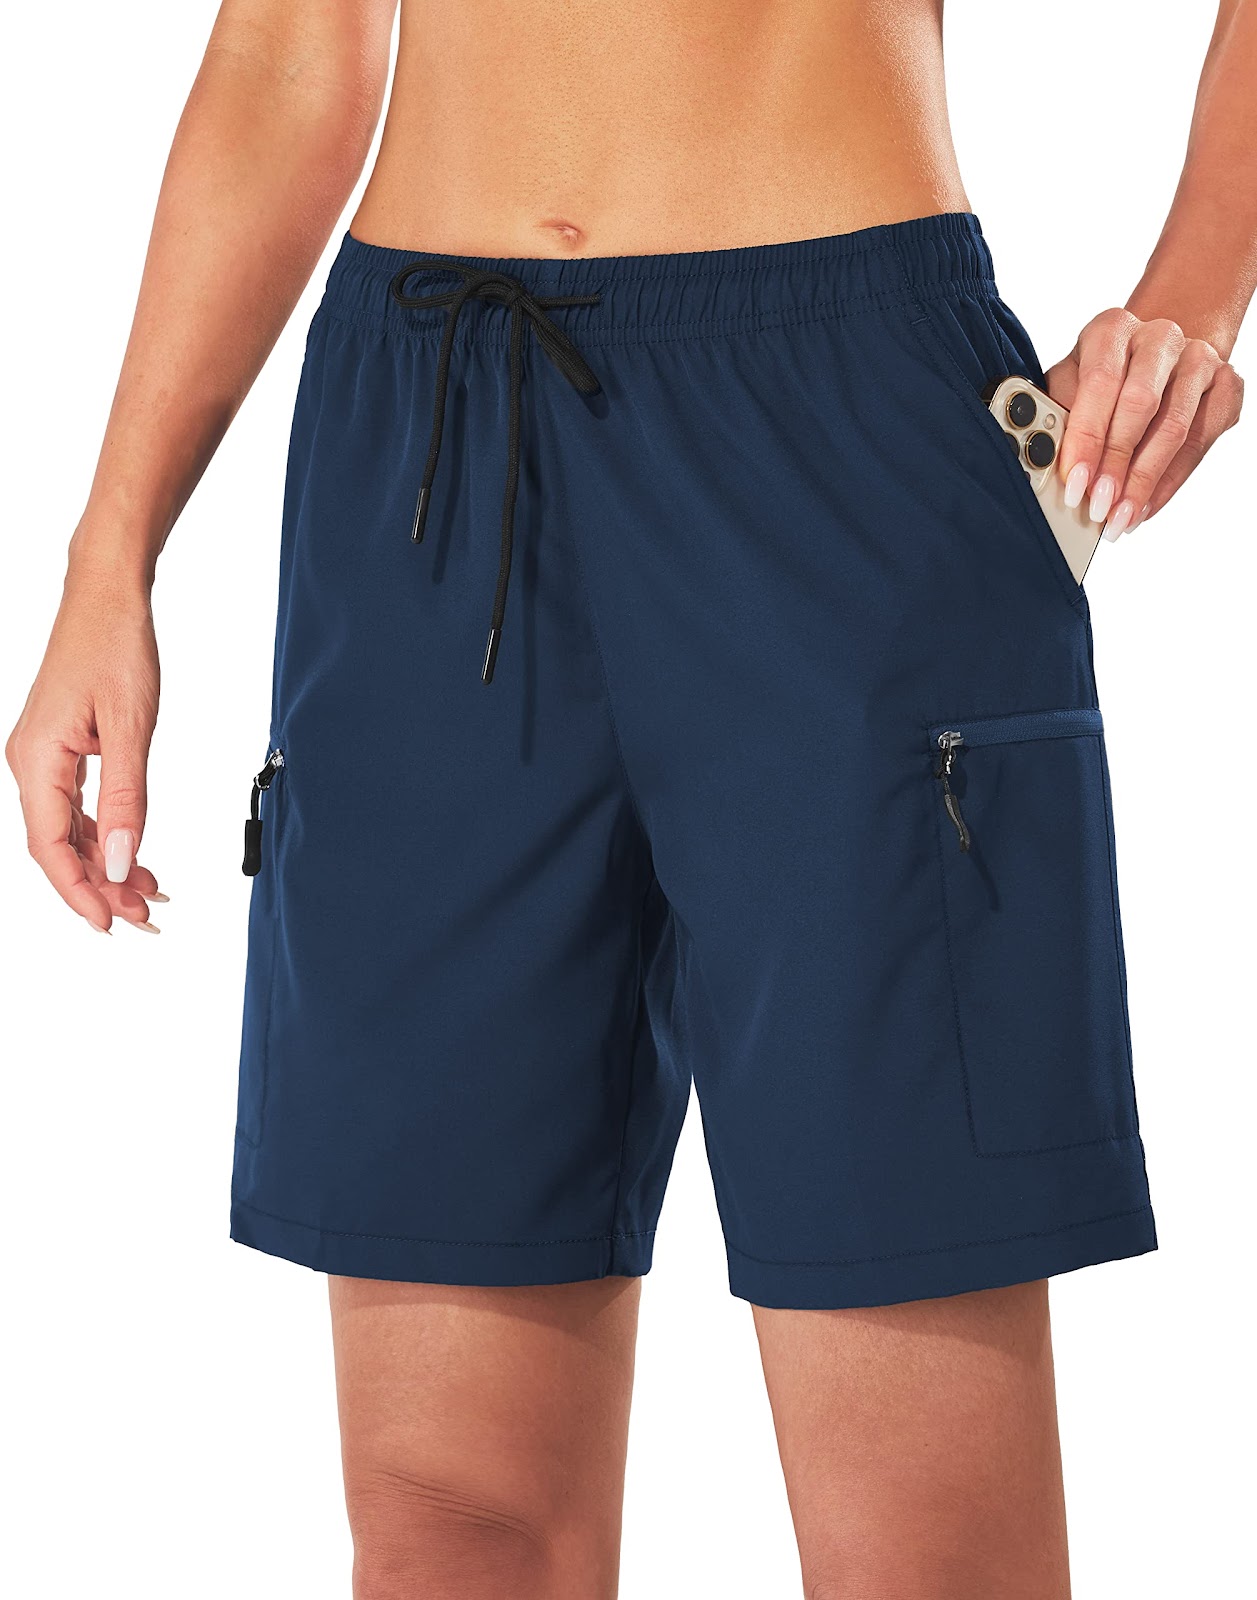 Looleafy Women's Hiking Cargo Shorts with Zipper Pockets 7" Quick Dry Lightweight Summer Shorts for Women Golf Athletic Small Navy